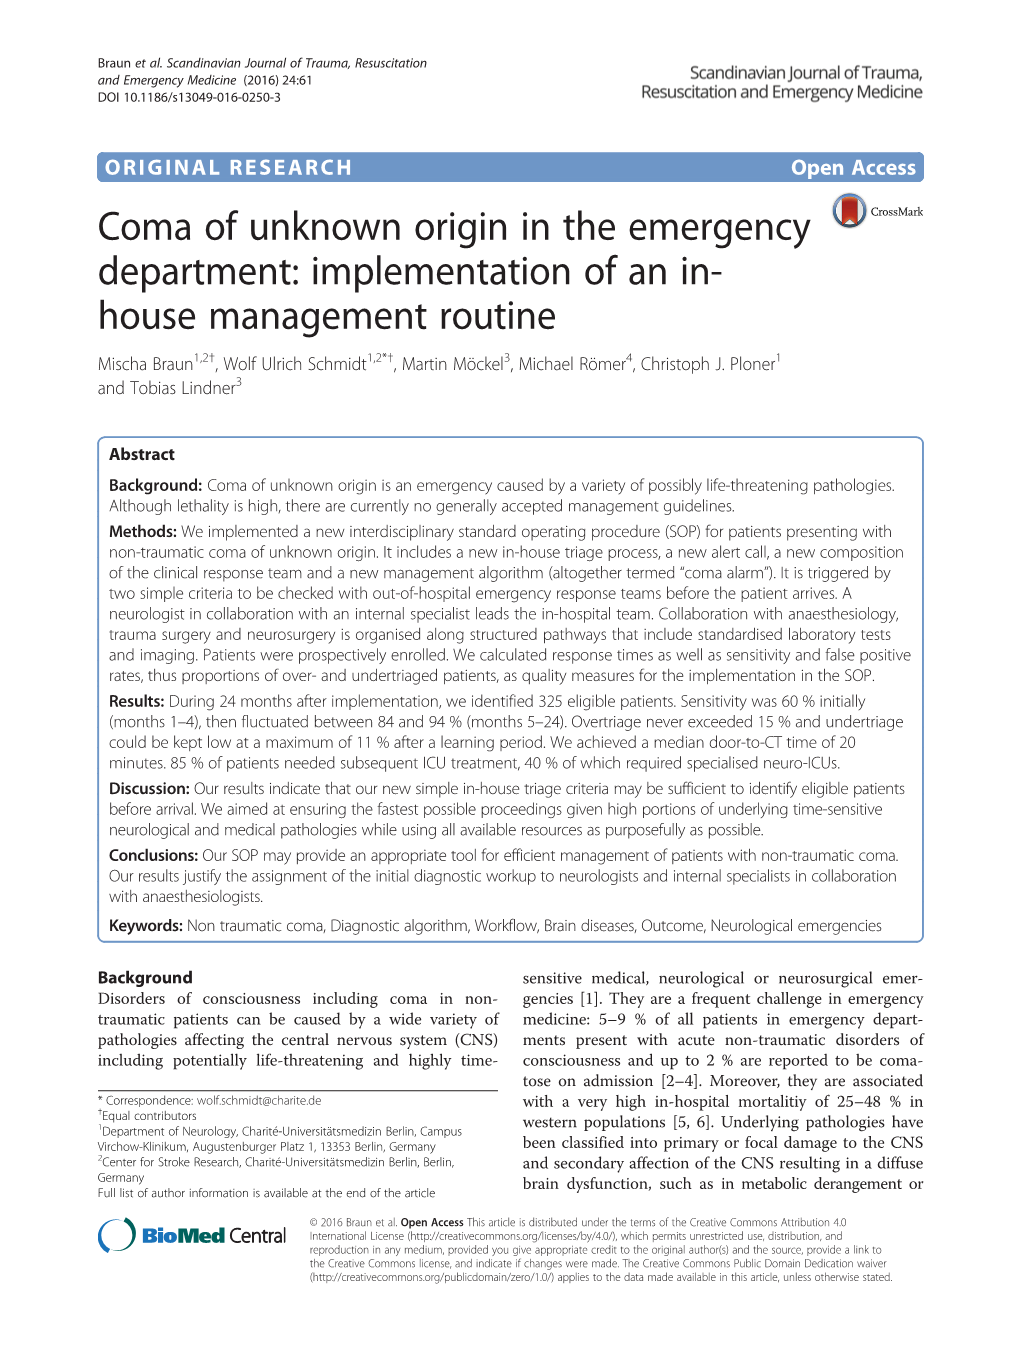 Coma of Unknown Origin in the Emergency Department